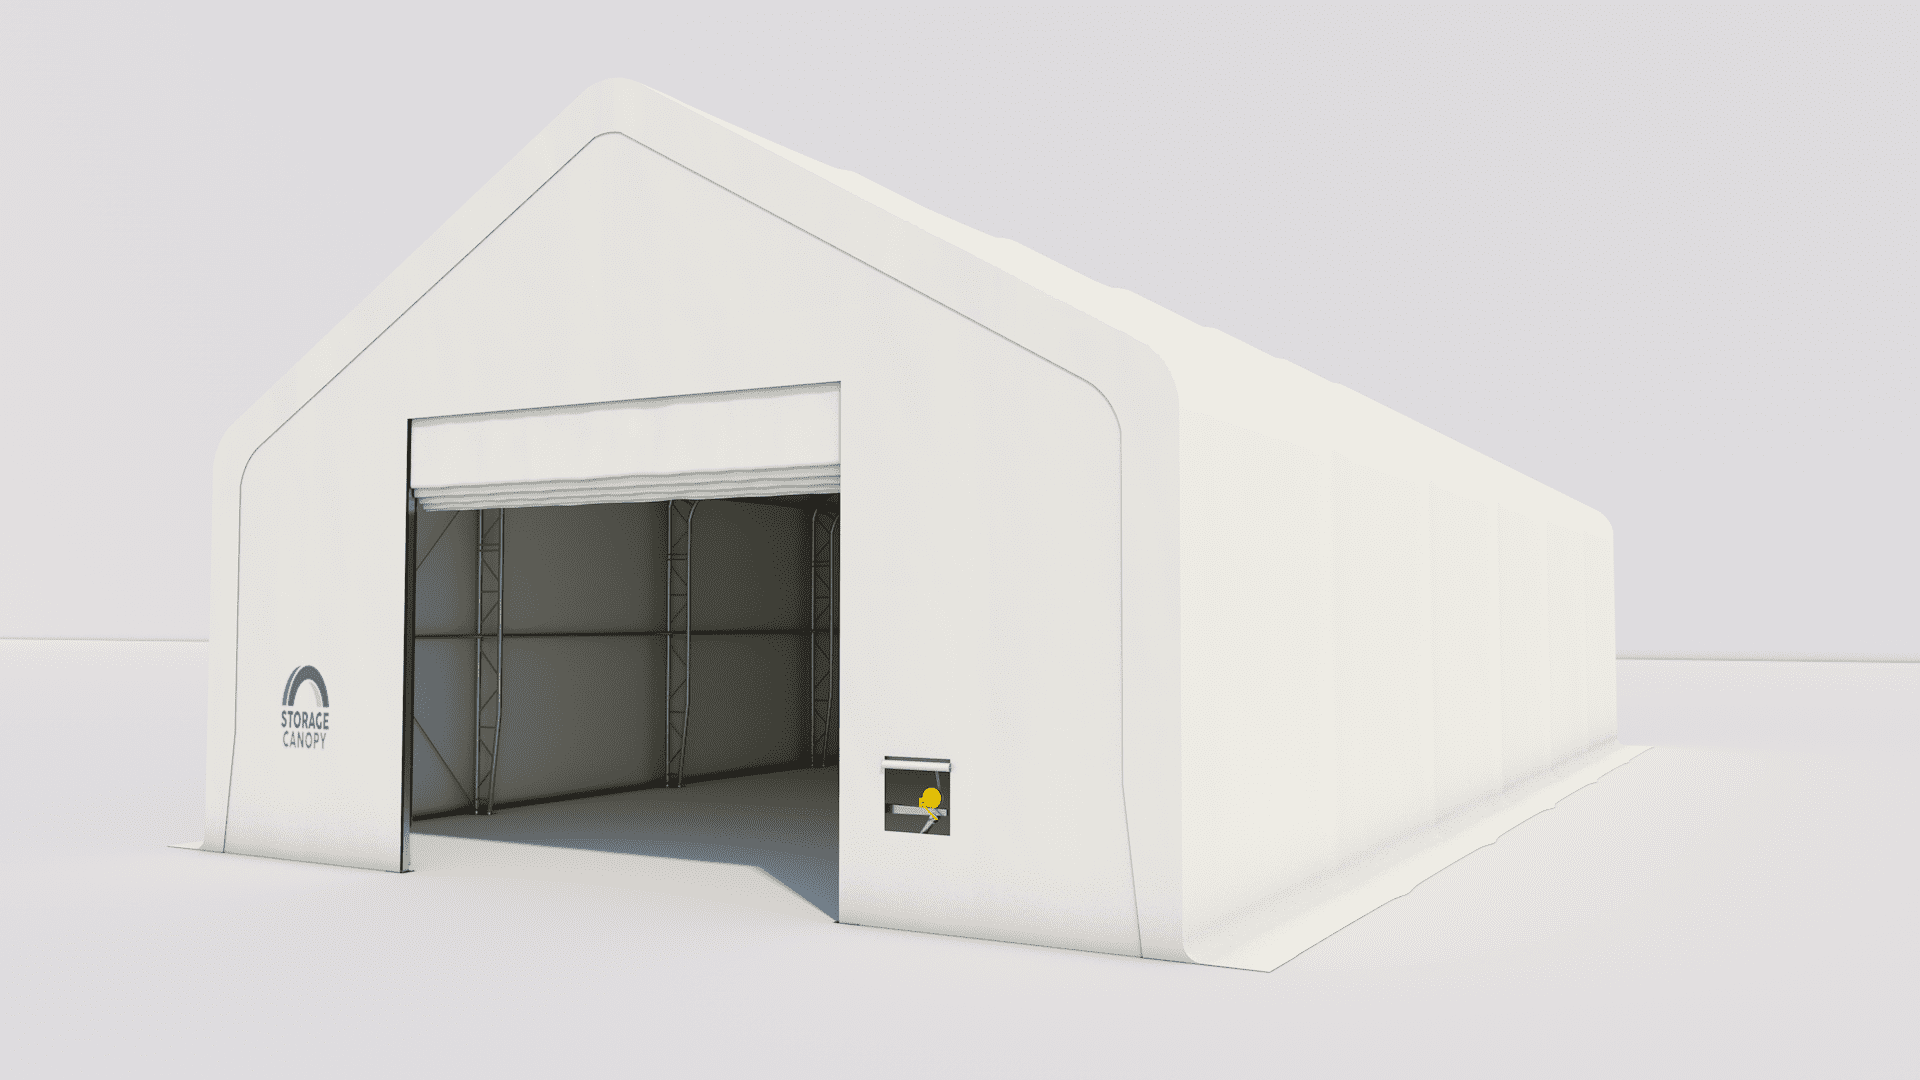 Fabric building 30W 60L 20H - persp right open white